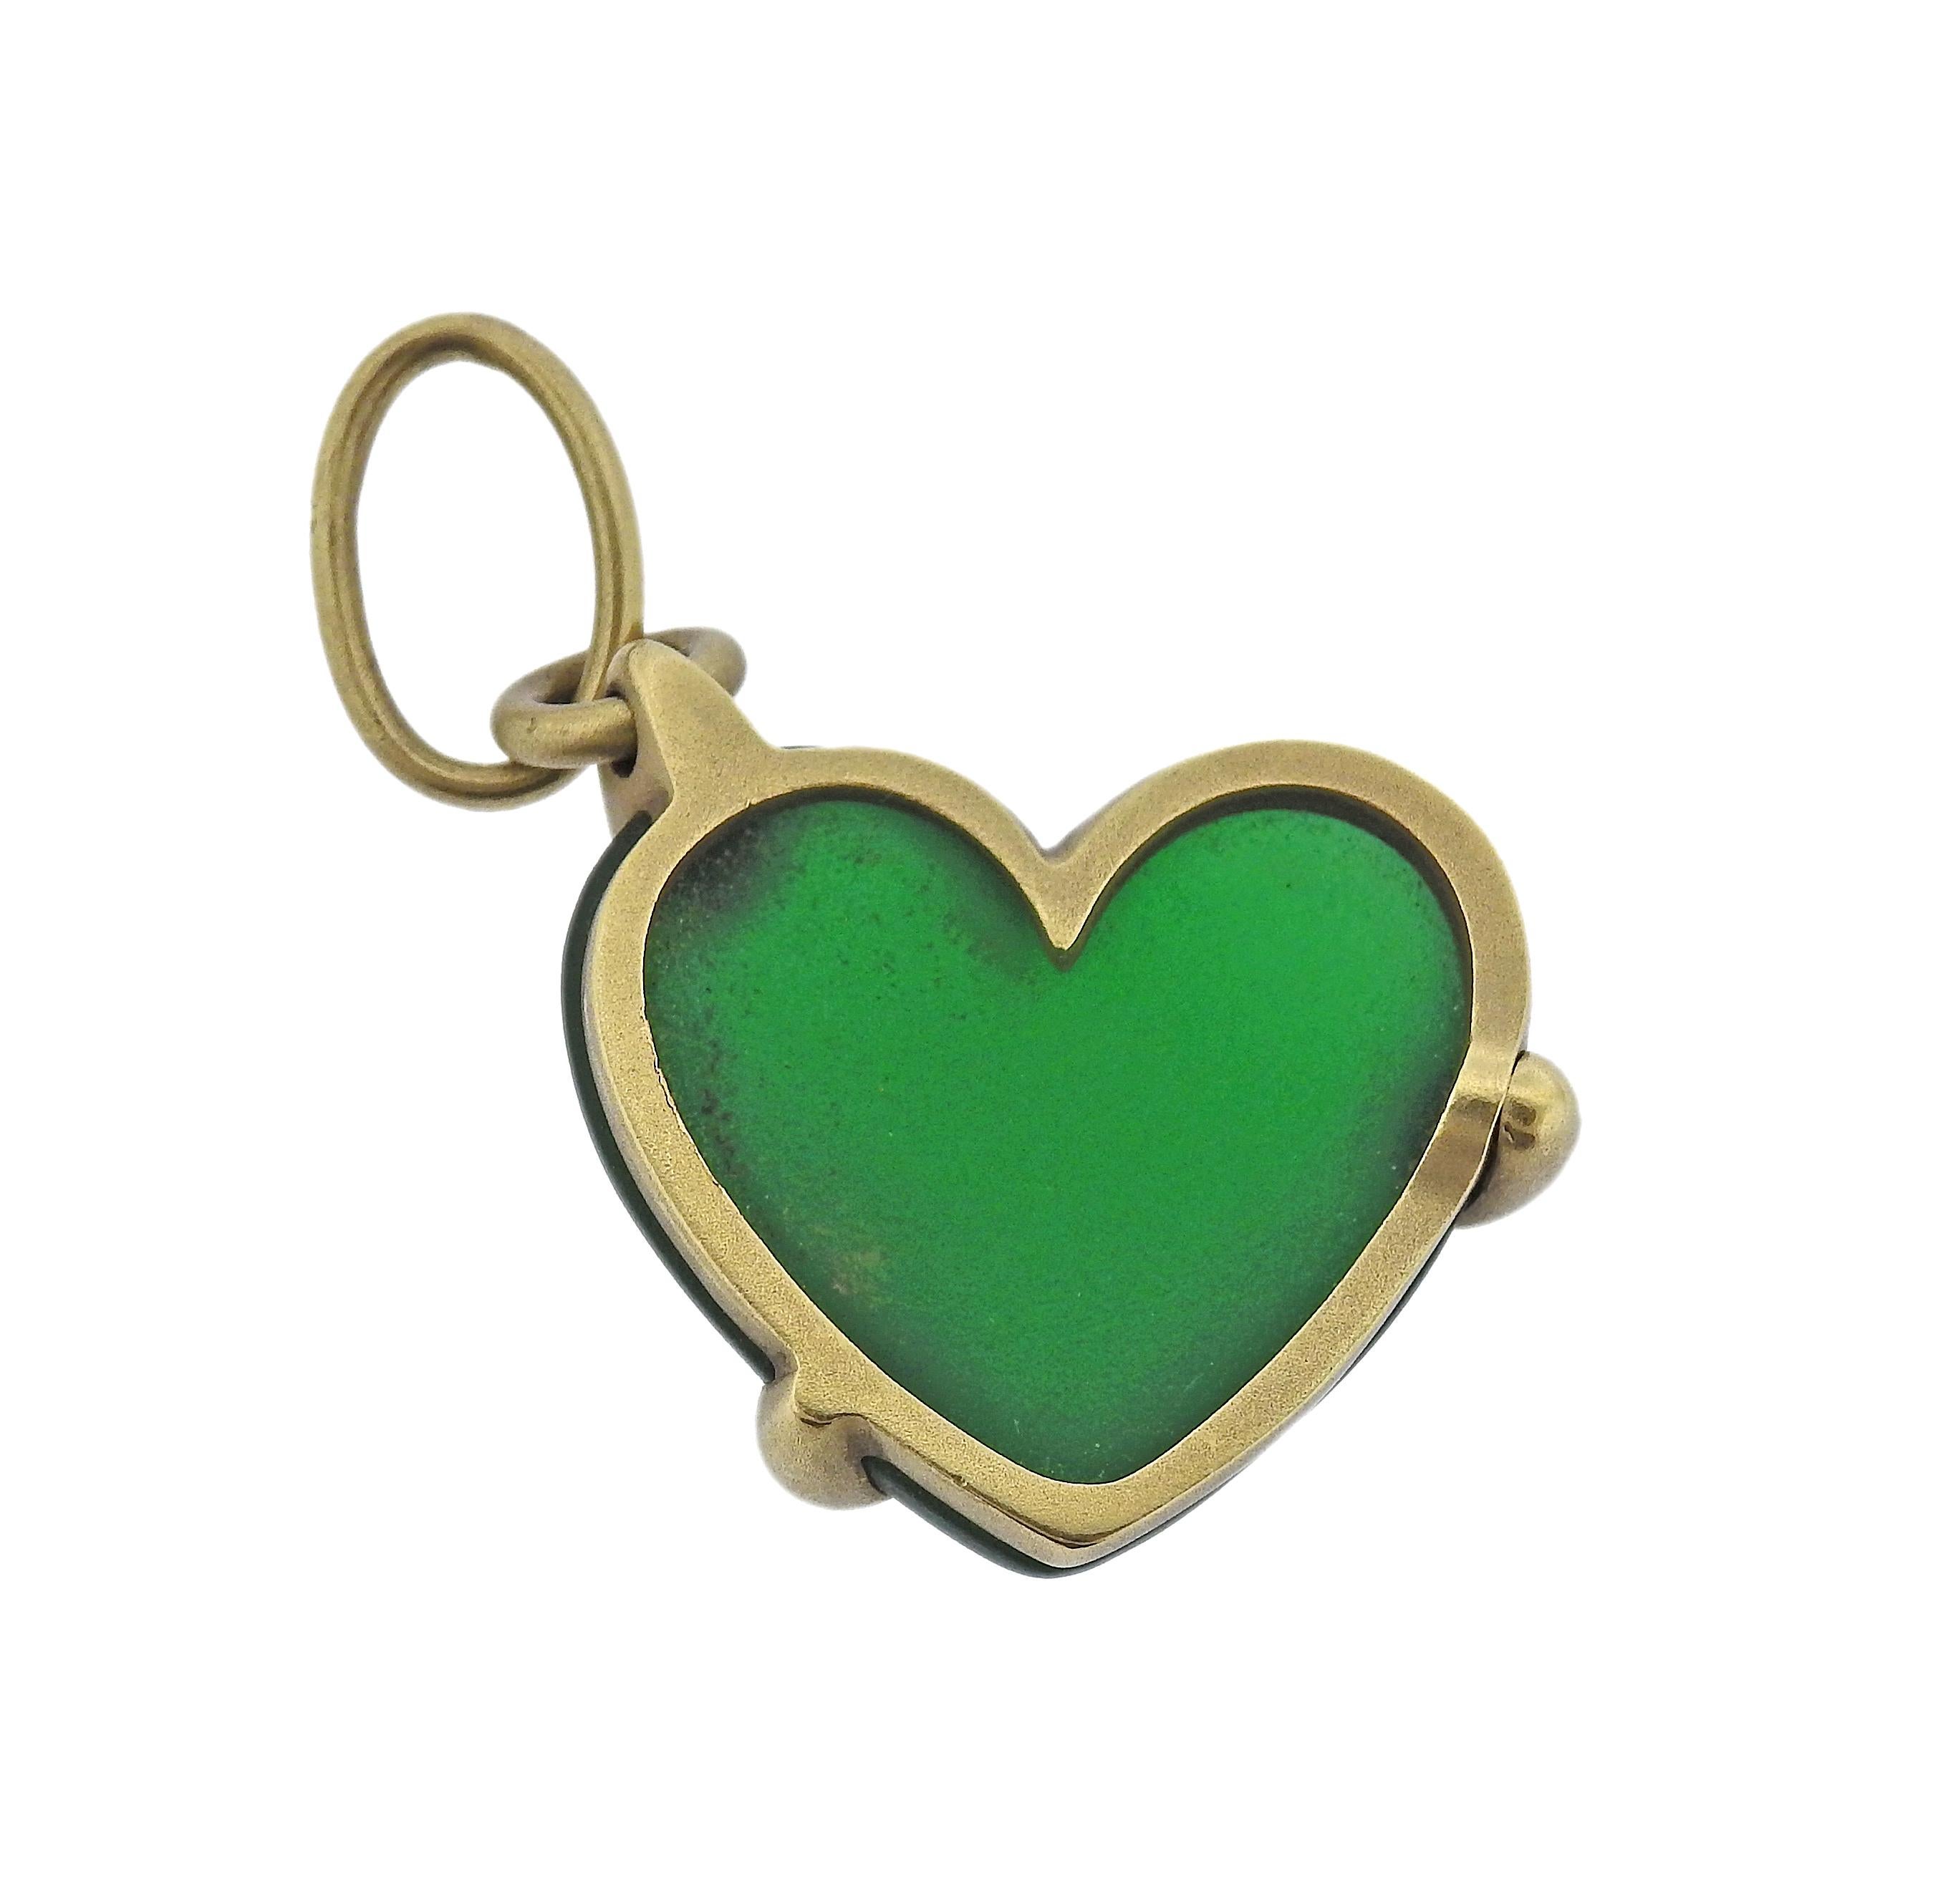 18k gold Pomellato heart pendant, with frosted green chrysoprase. Pendant measures 1/8